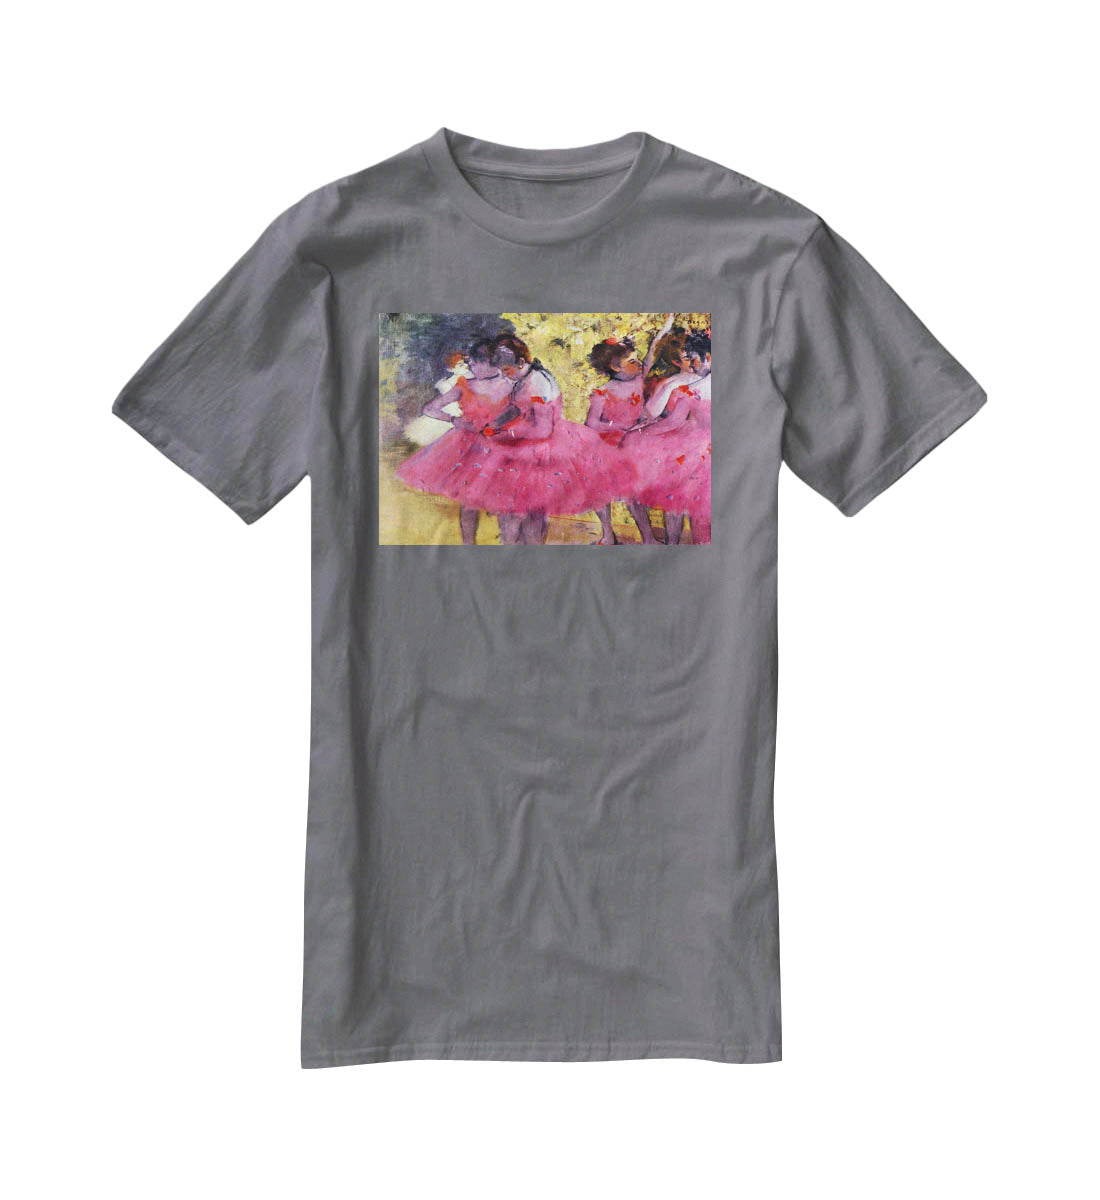 Dancers in pink between the scenes by Degas T-Shirt - Canvas Art Rocks - 3